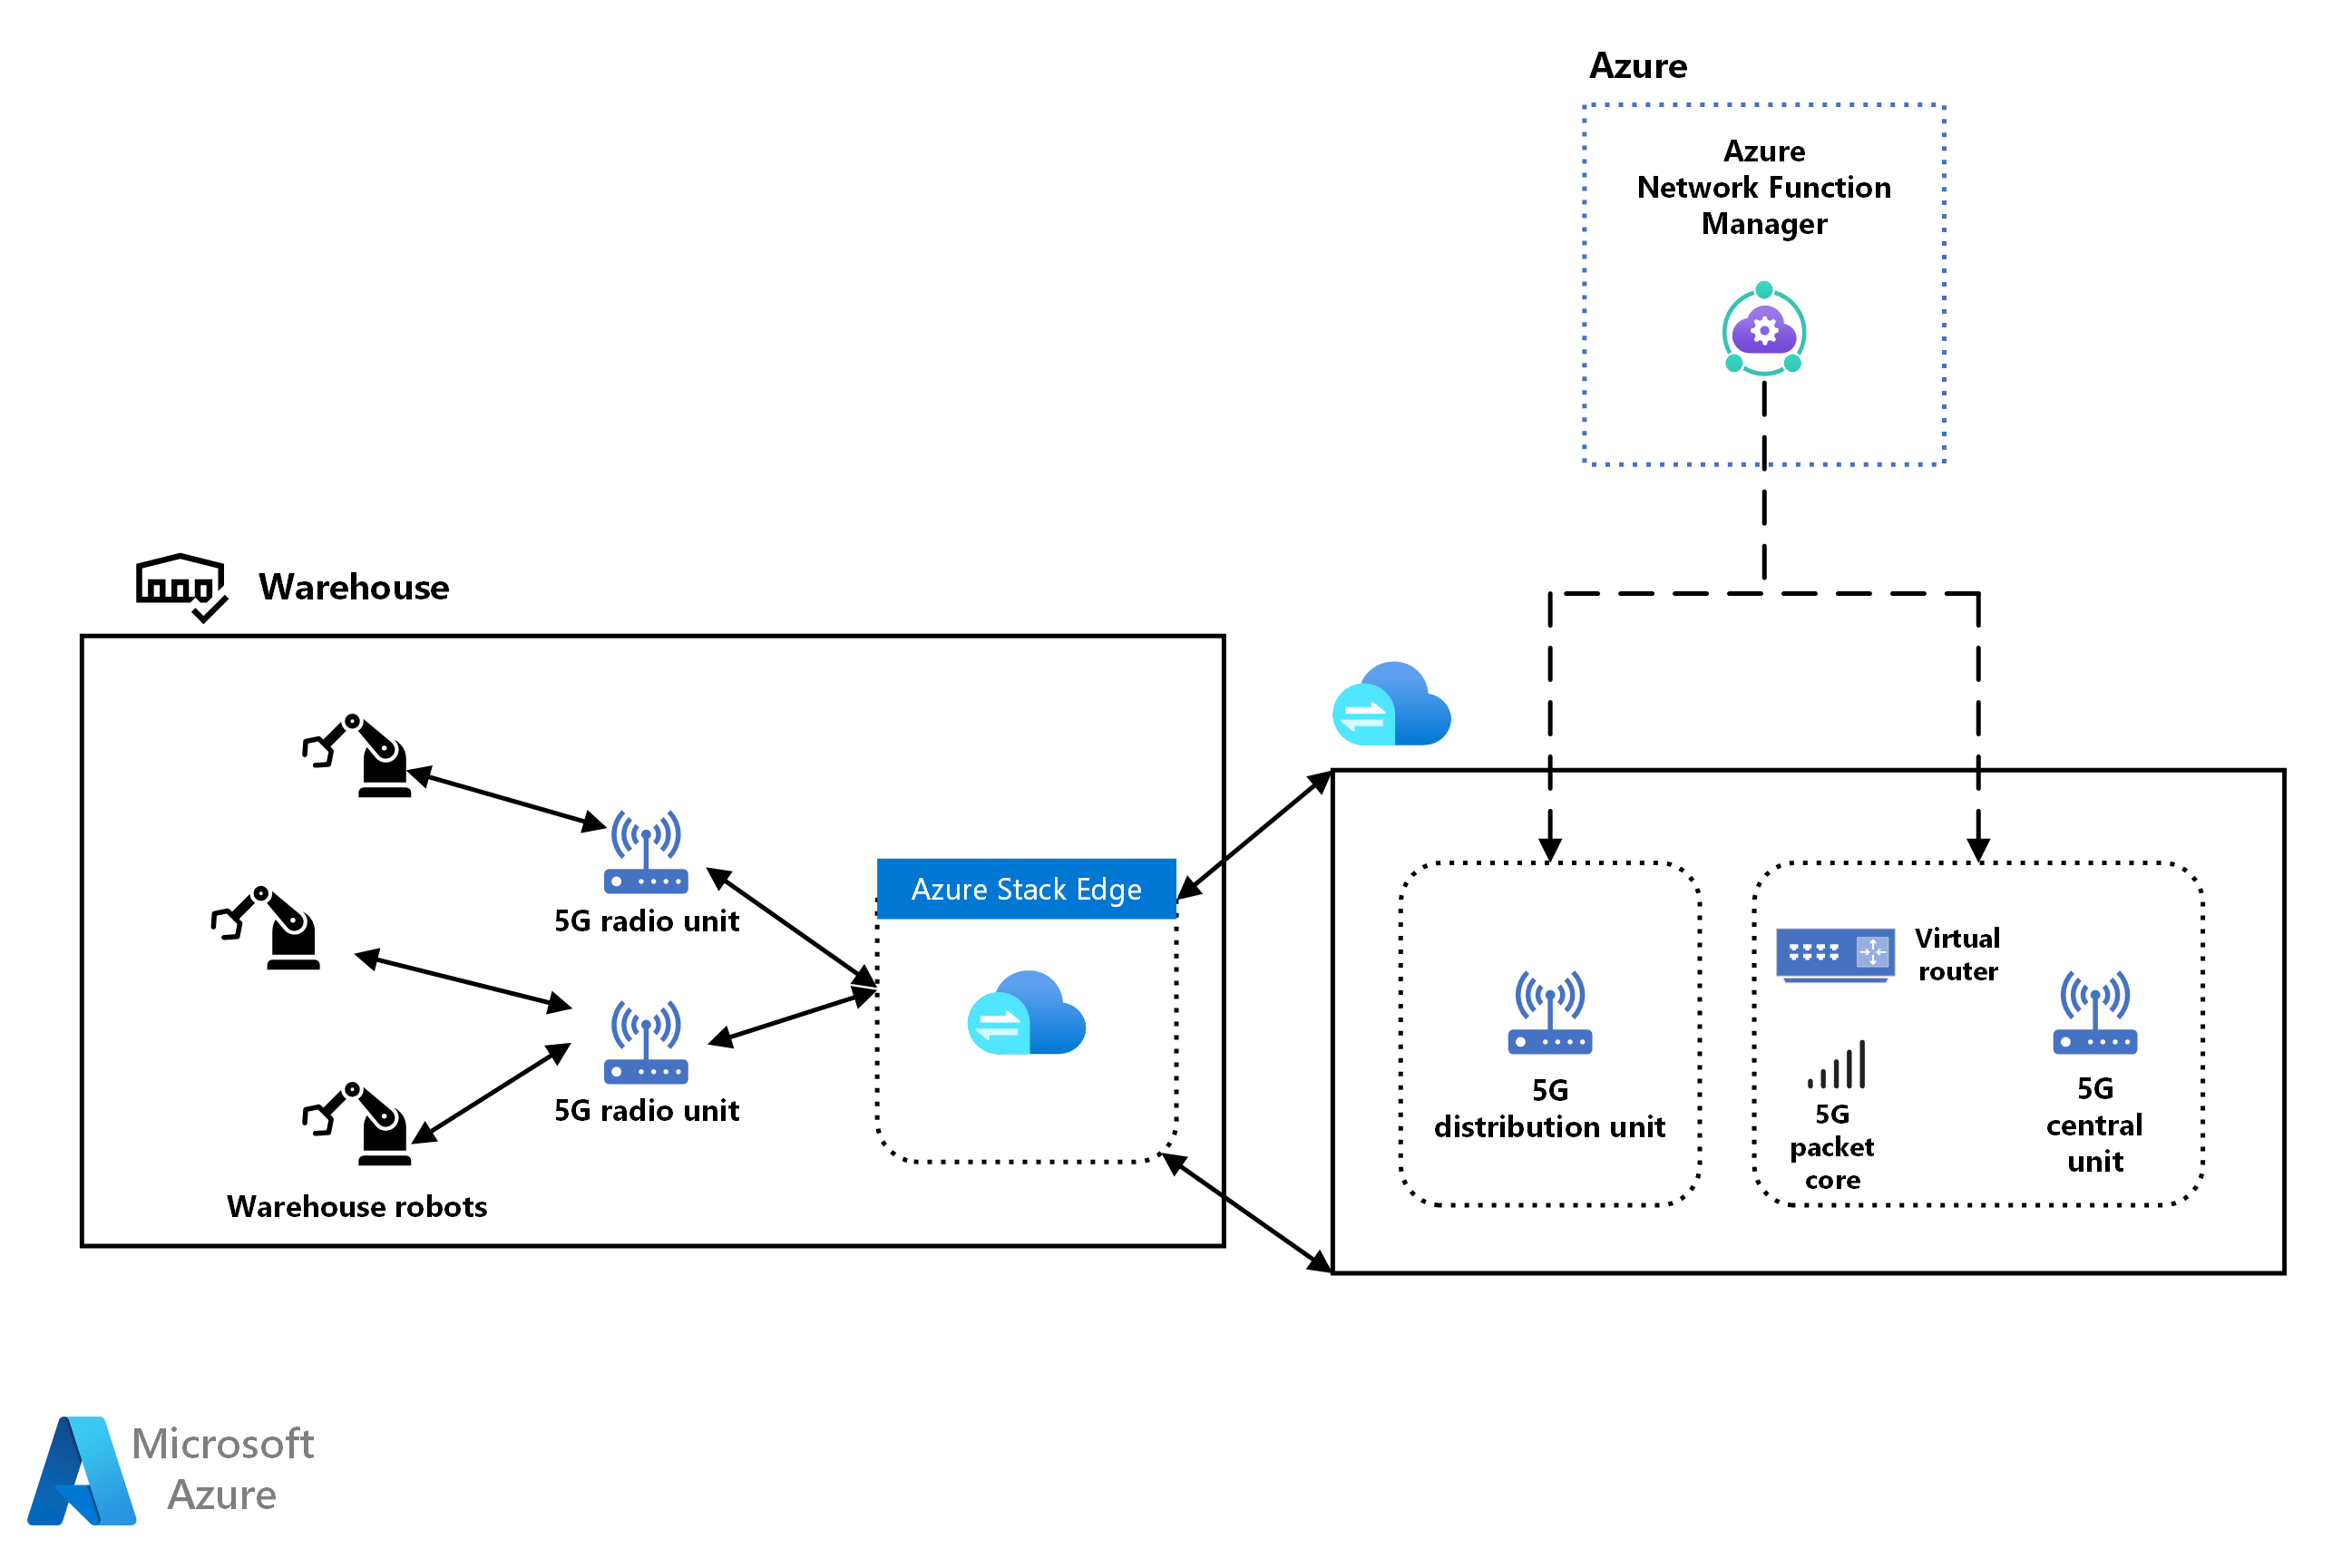 Screenshot showing a 5G Standalone network that controls warehouse robots through an on-premises Azure Stack Edge server. Azure Network Function Manager controls the private multi-access edge compute nodes on Azure Stack Edge.